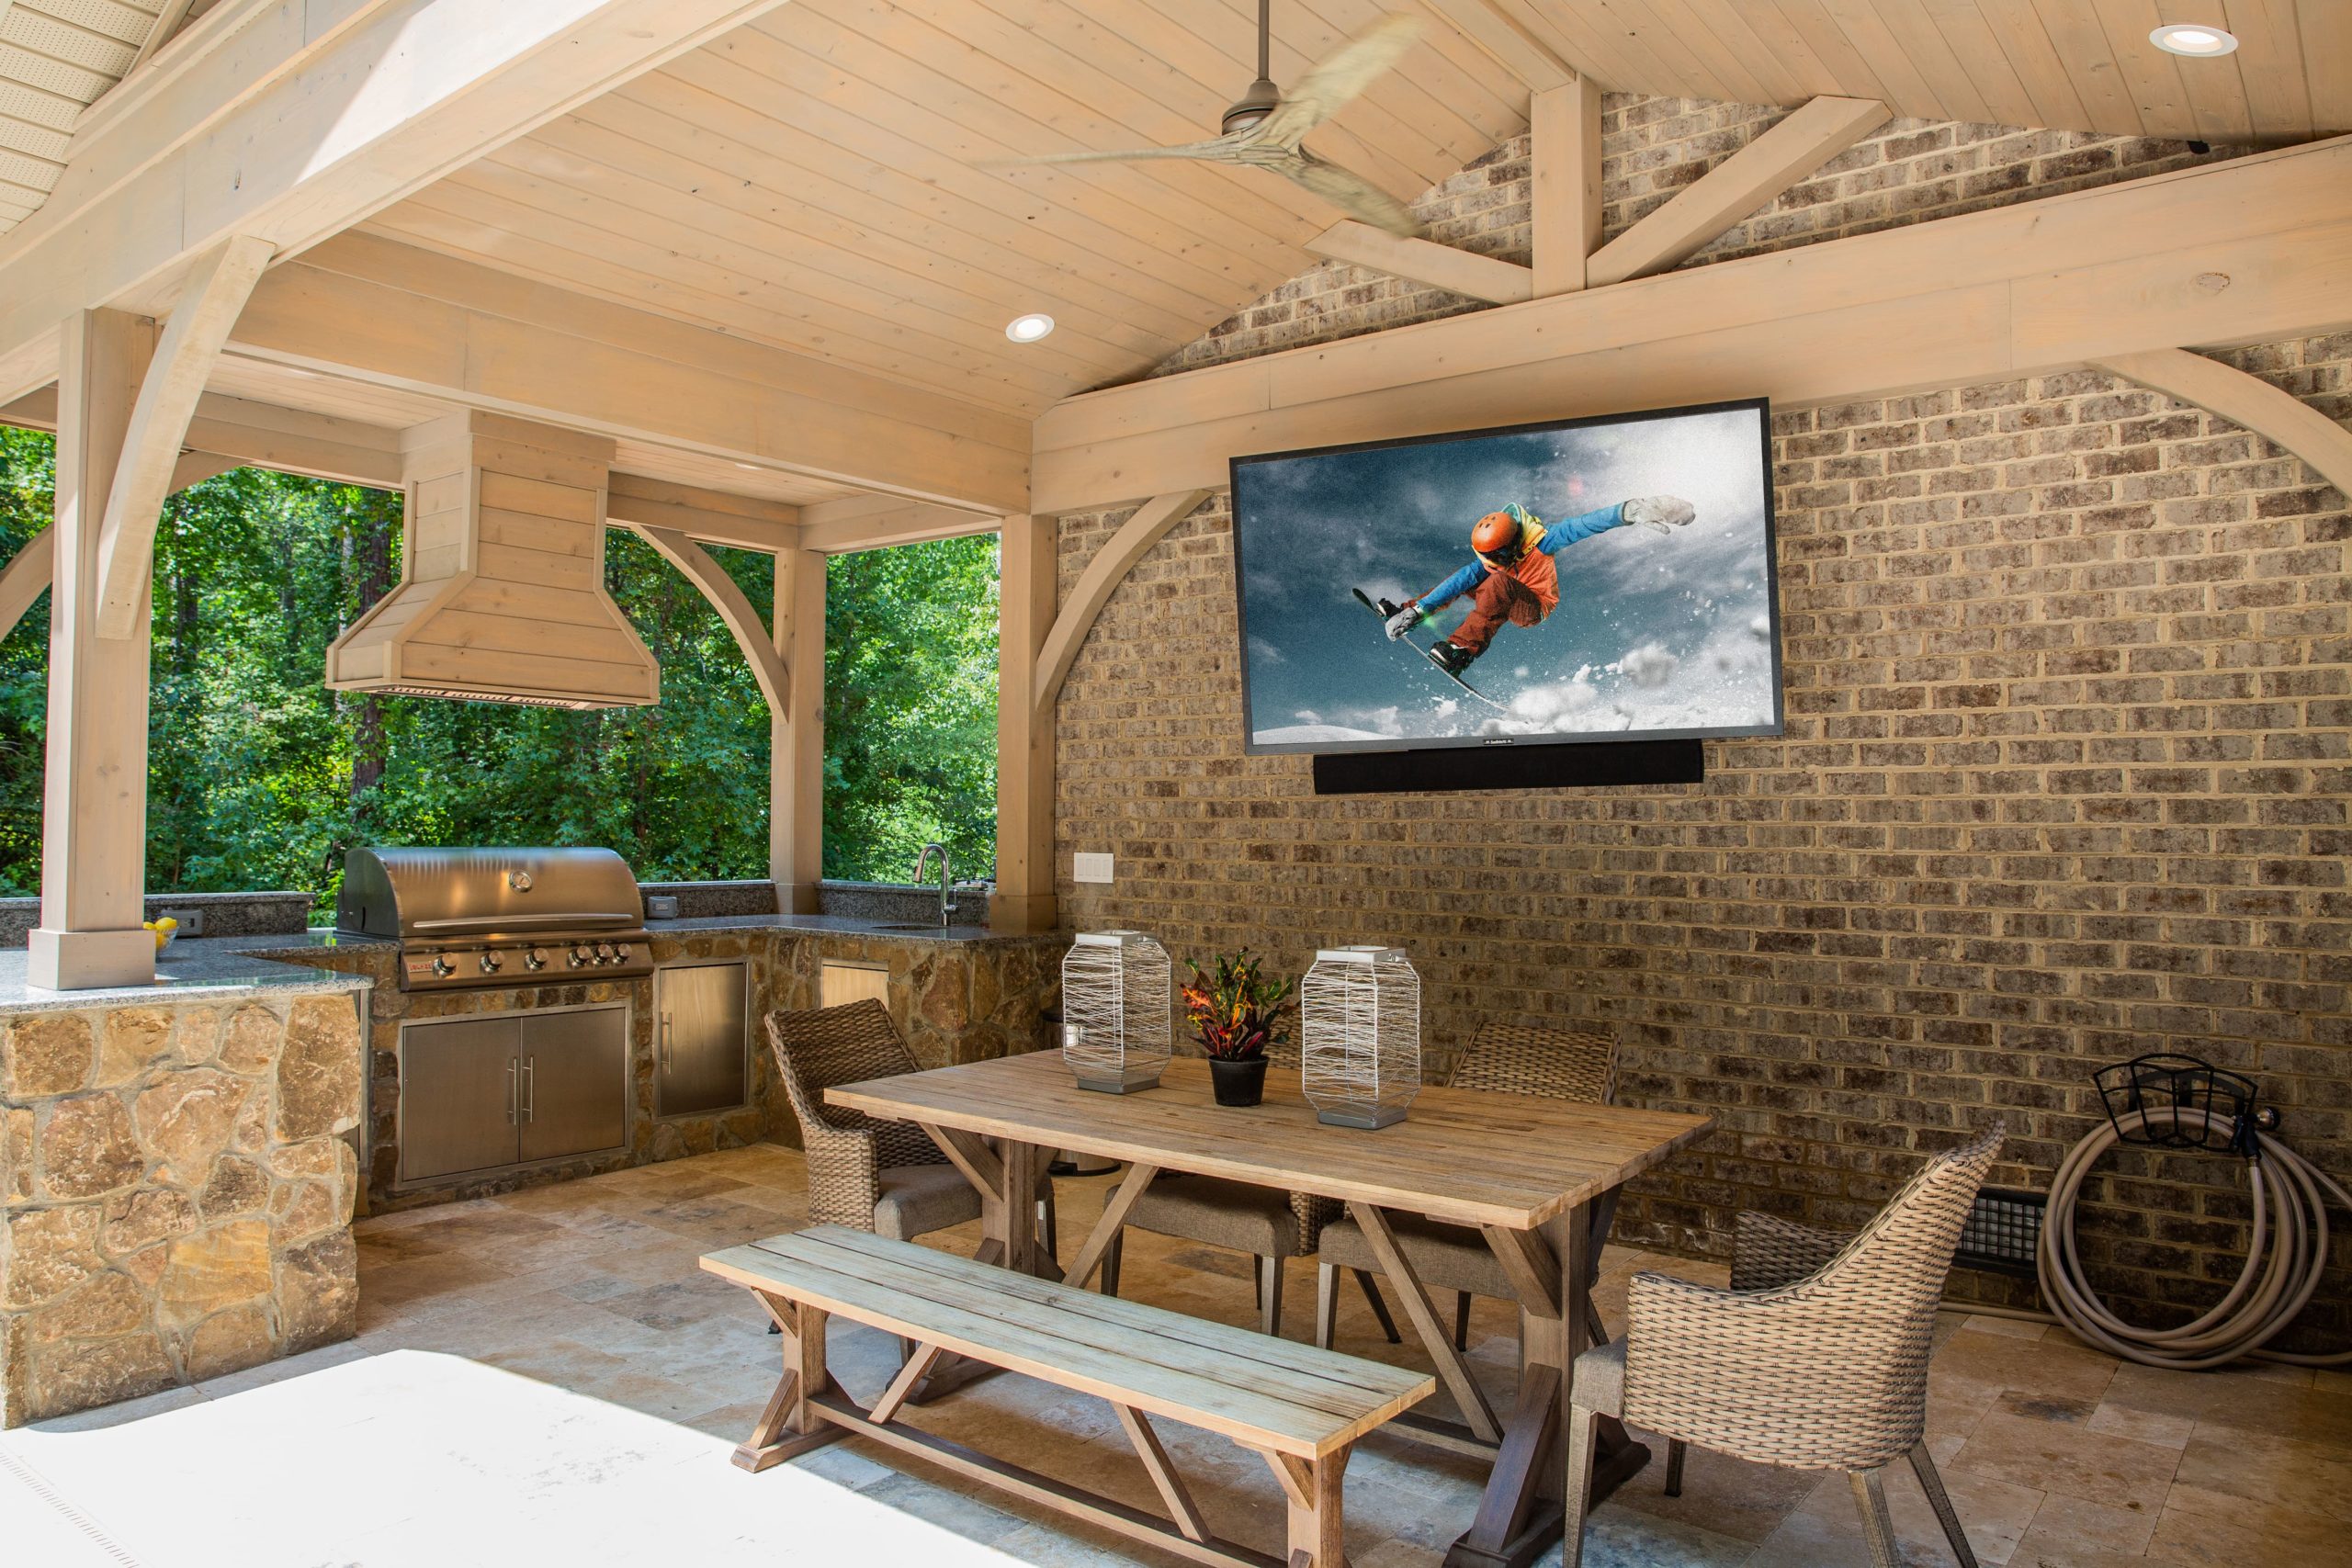 Outdoor TV on wall